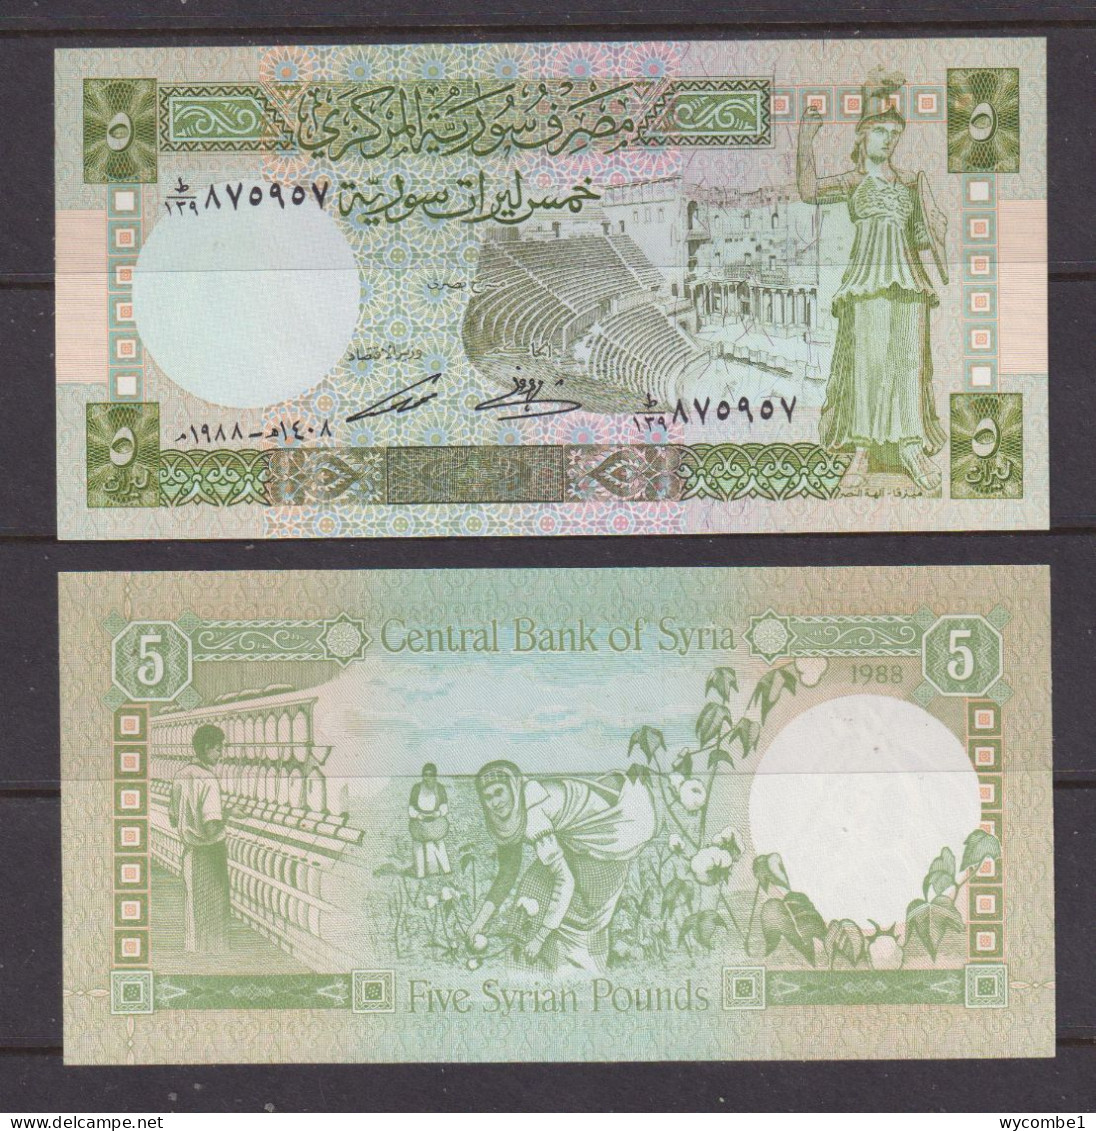 SYRIA  -  1991  5 Pounds UNC Banknote - Syrie